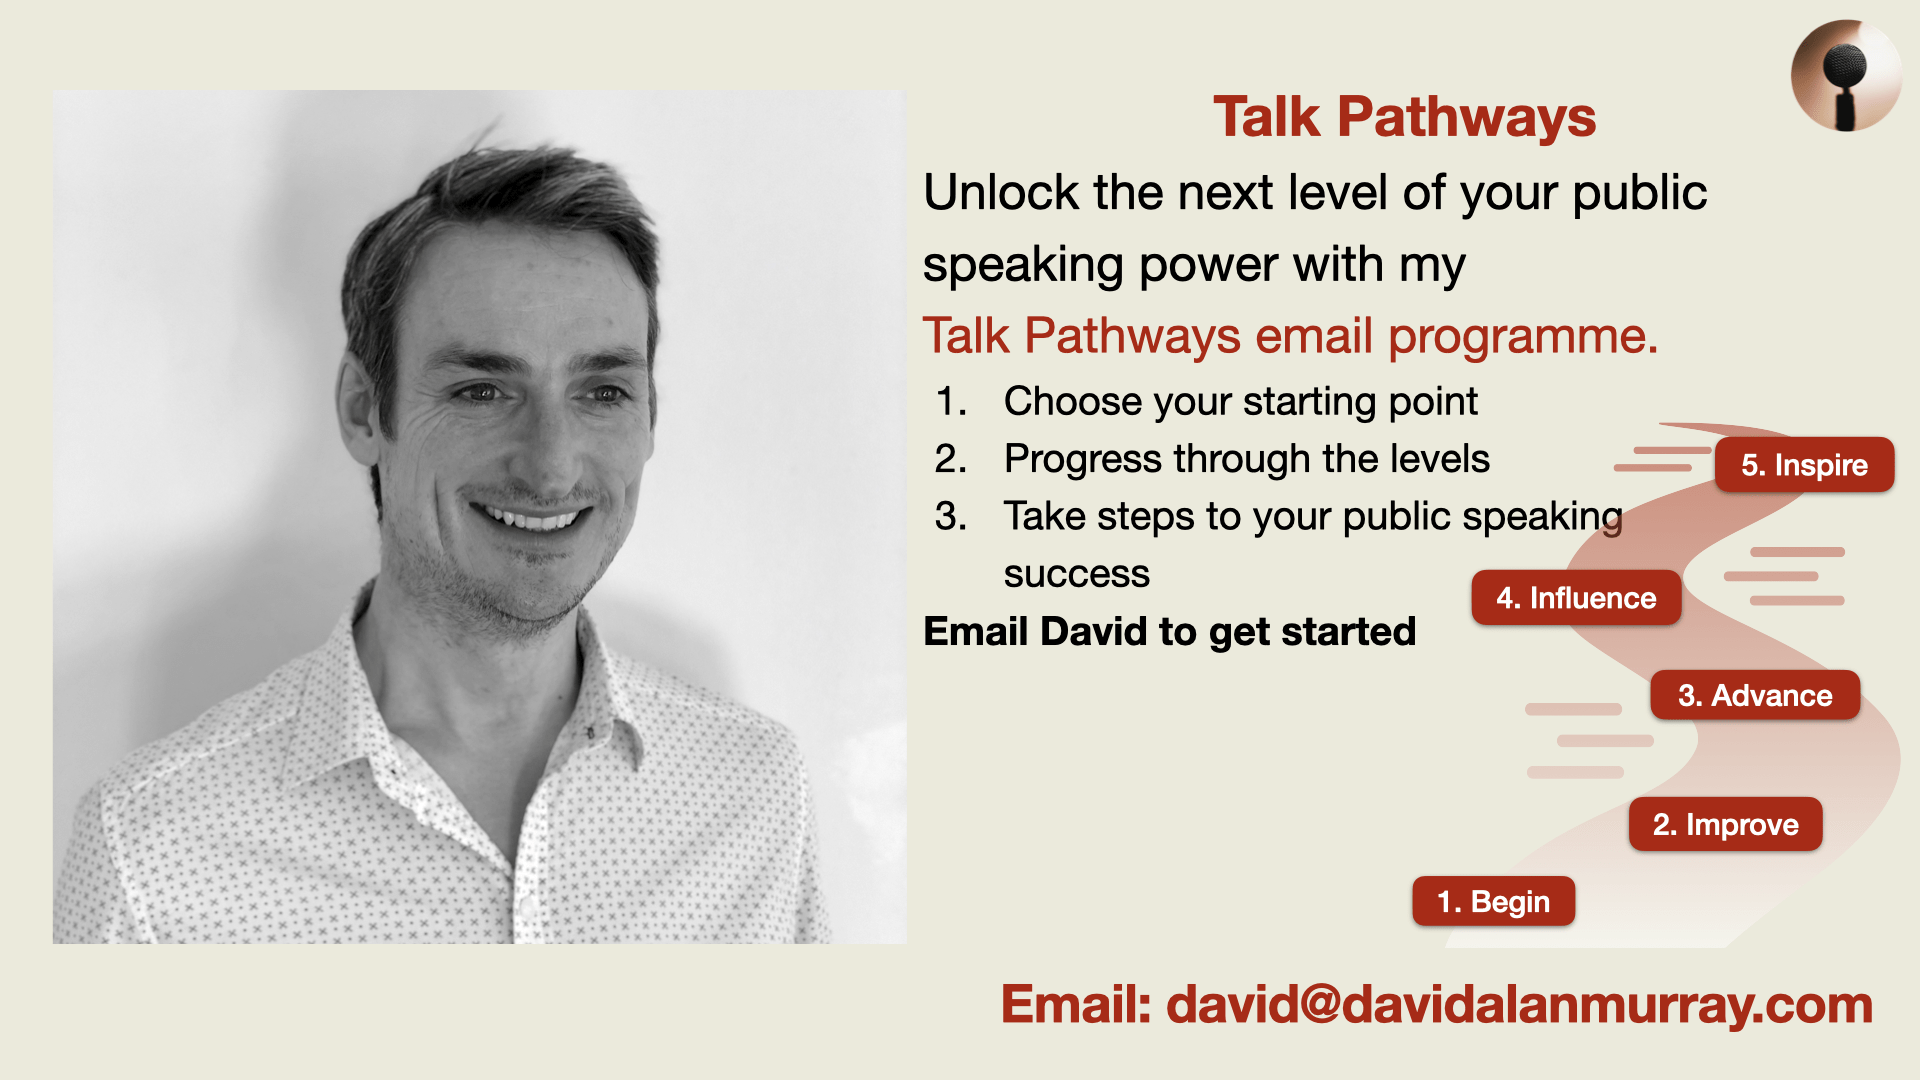 Unlock the next level of your public speaking power with David Murray Talk Pathways email programme